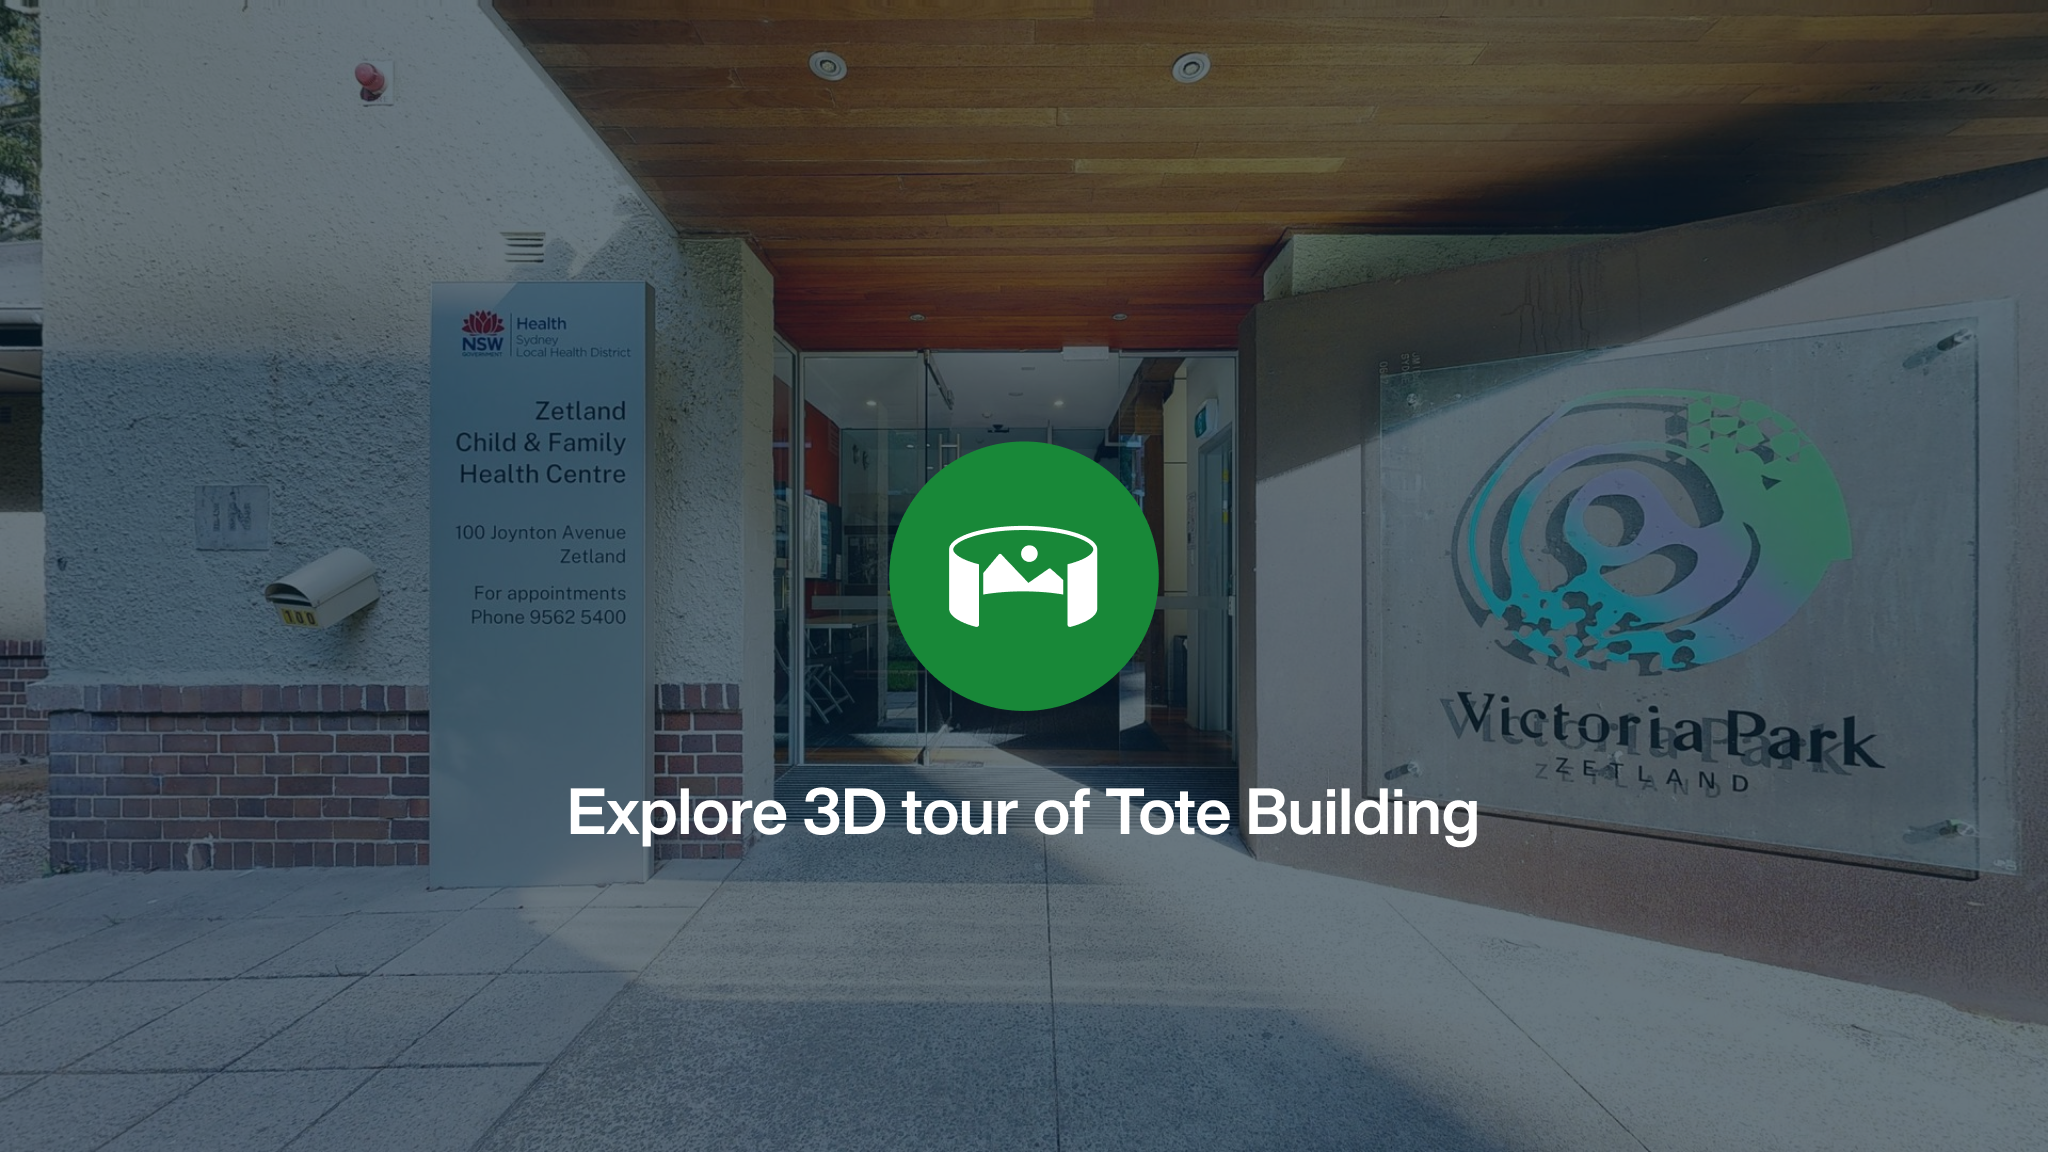 An exterior image of the Tote Building with an green icon and the words Explore 3D tour of Tote Building 